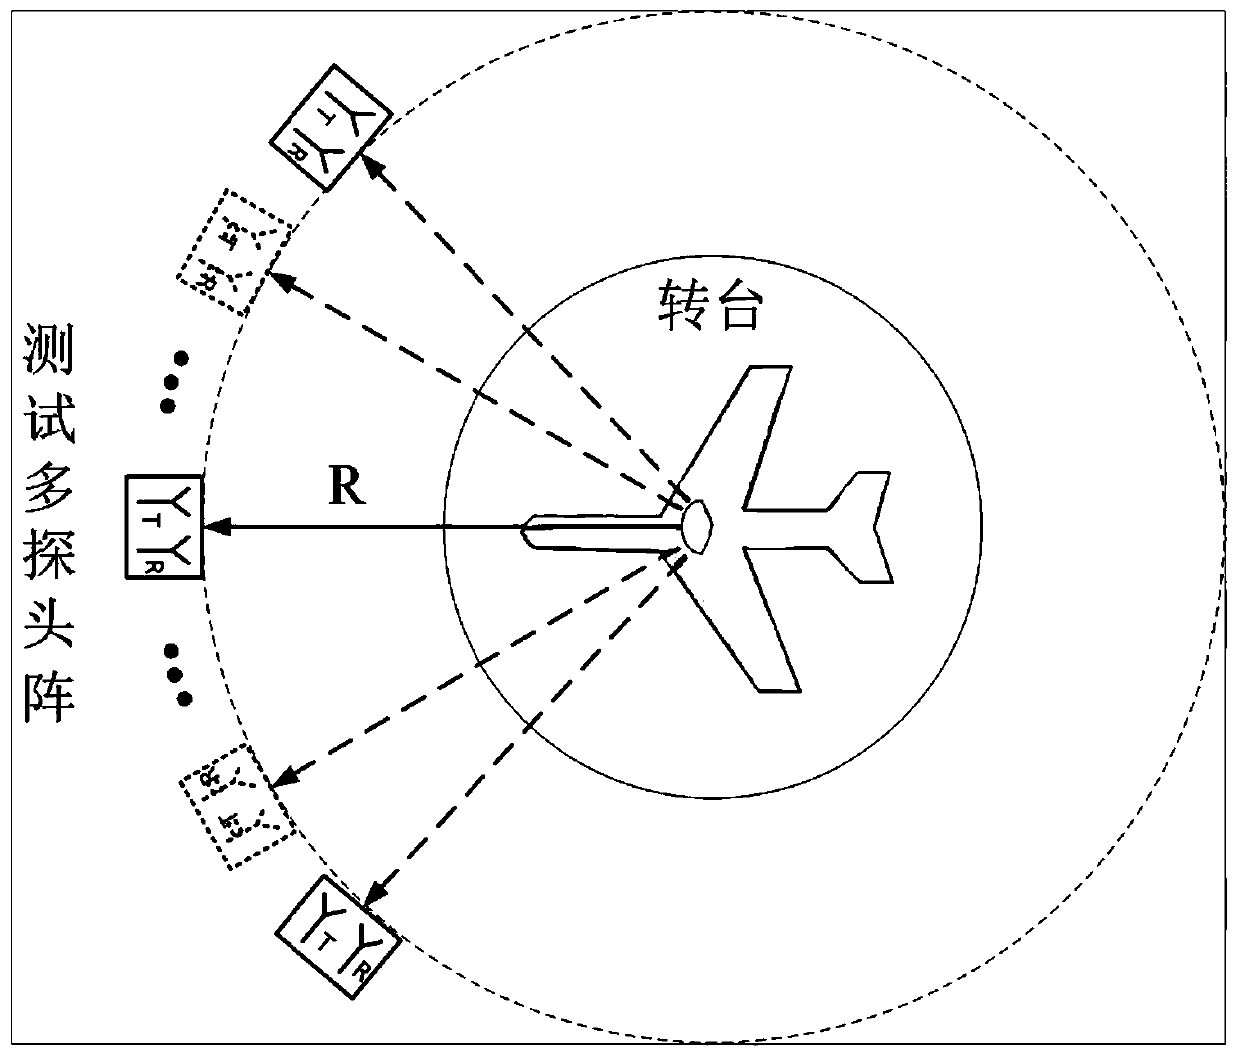 Multi-probe quasi-far-field electromagnetic scattering cross section (RCS) extrapolation test system